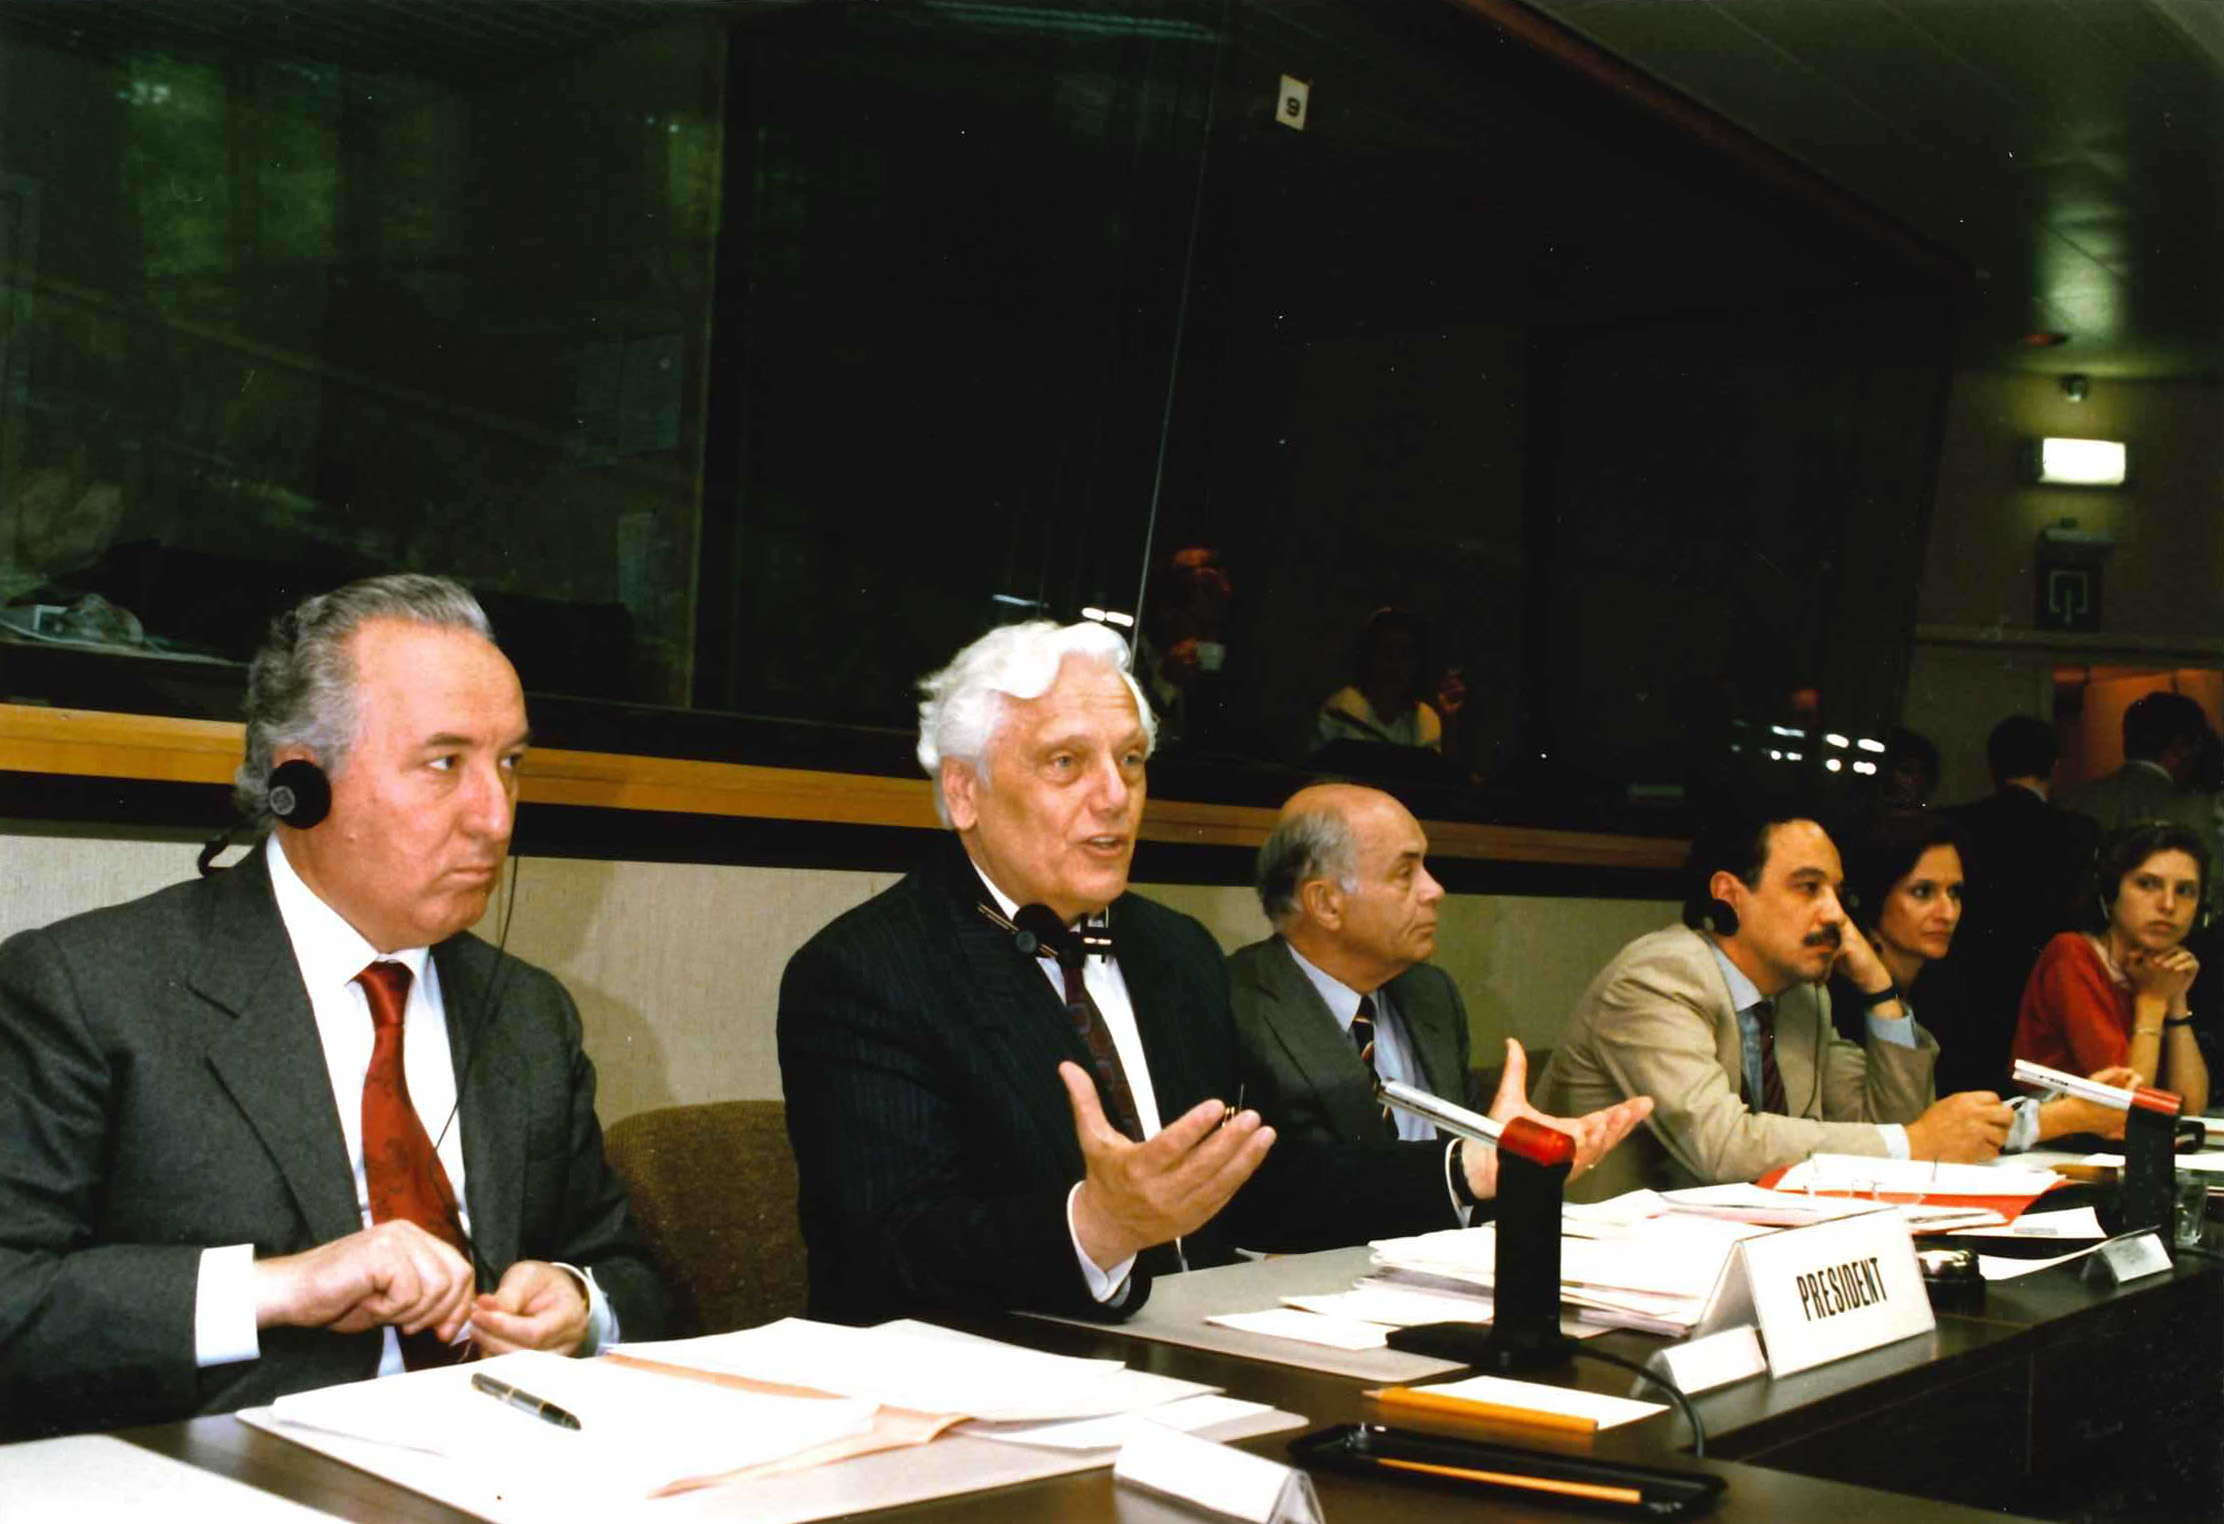 Josef Hofmann during a meeting with the European Commission in 1989. HAEU, CCRE-830. Photo: Christian Lambiotte